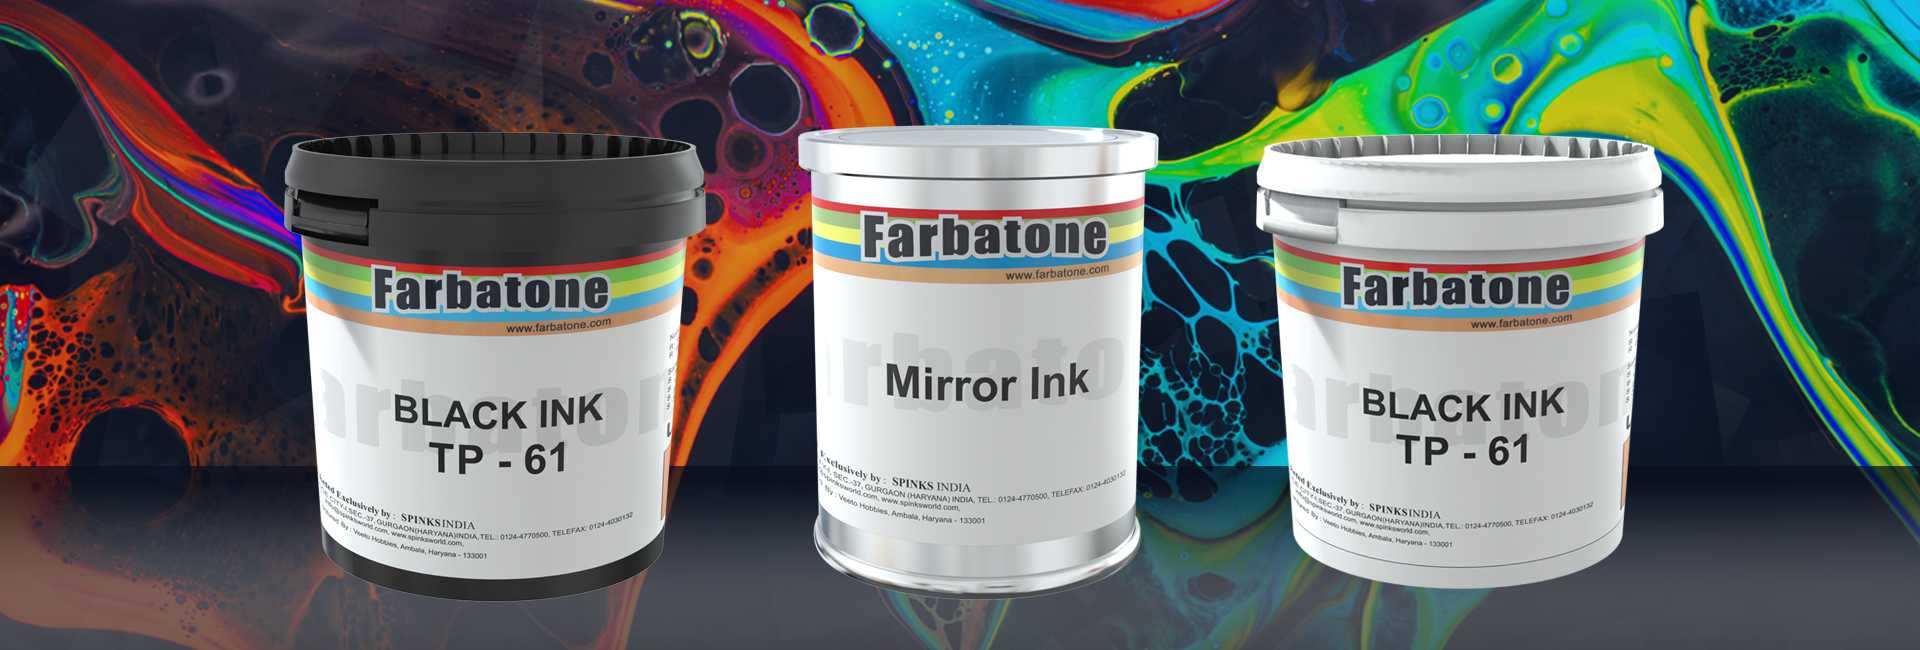 printing technologies and inks by Spinks world 